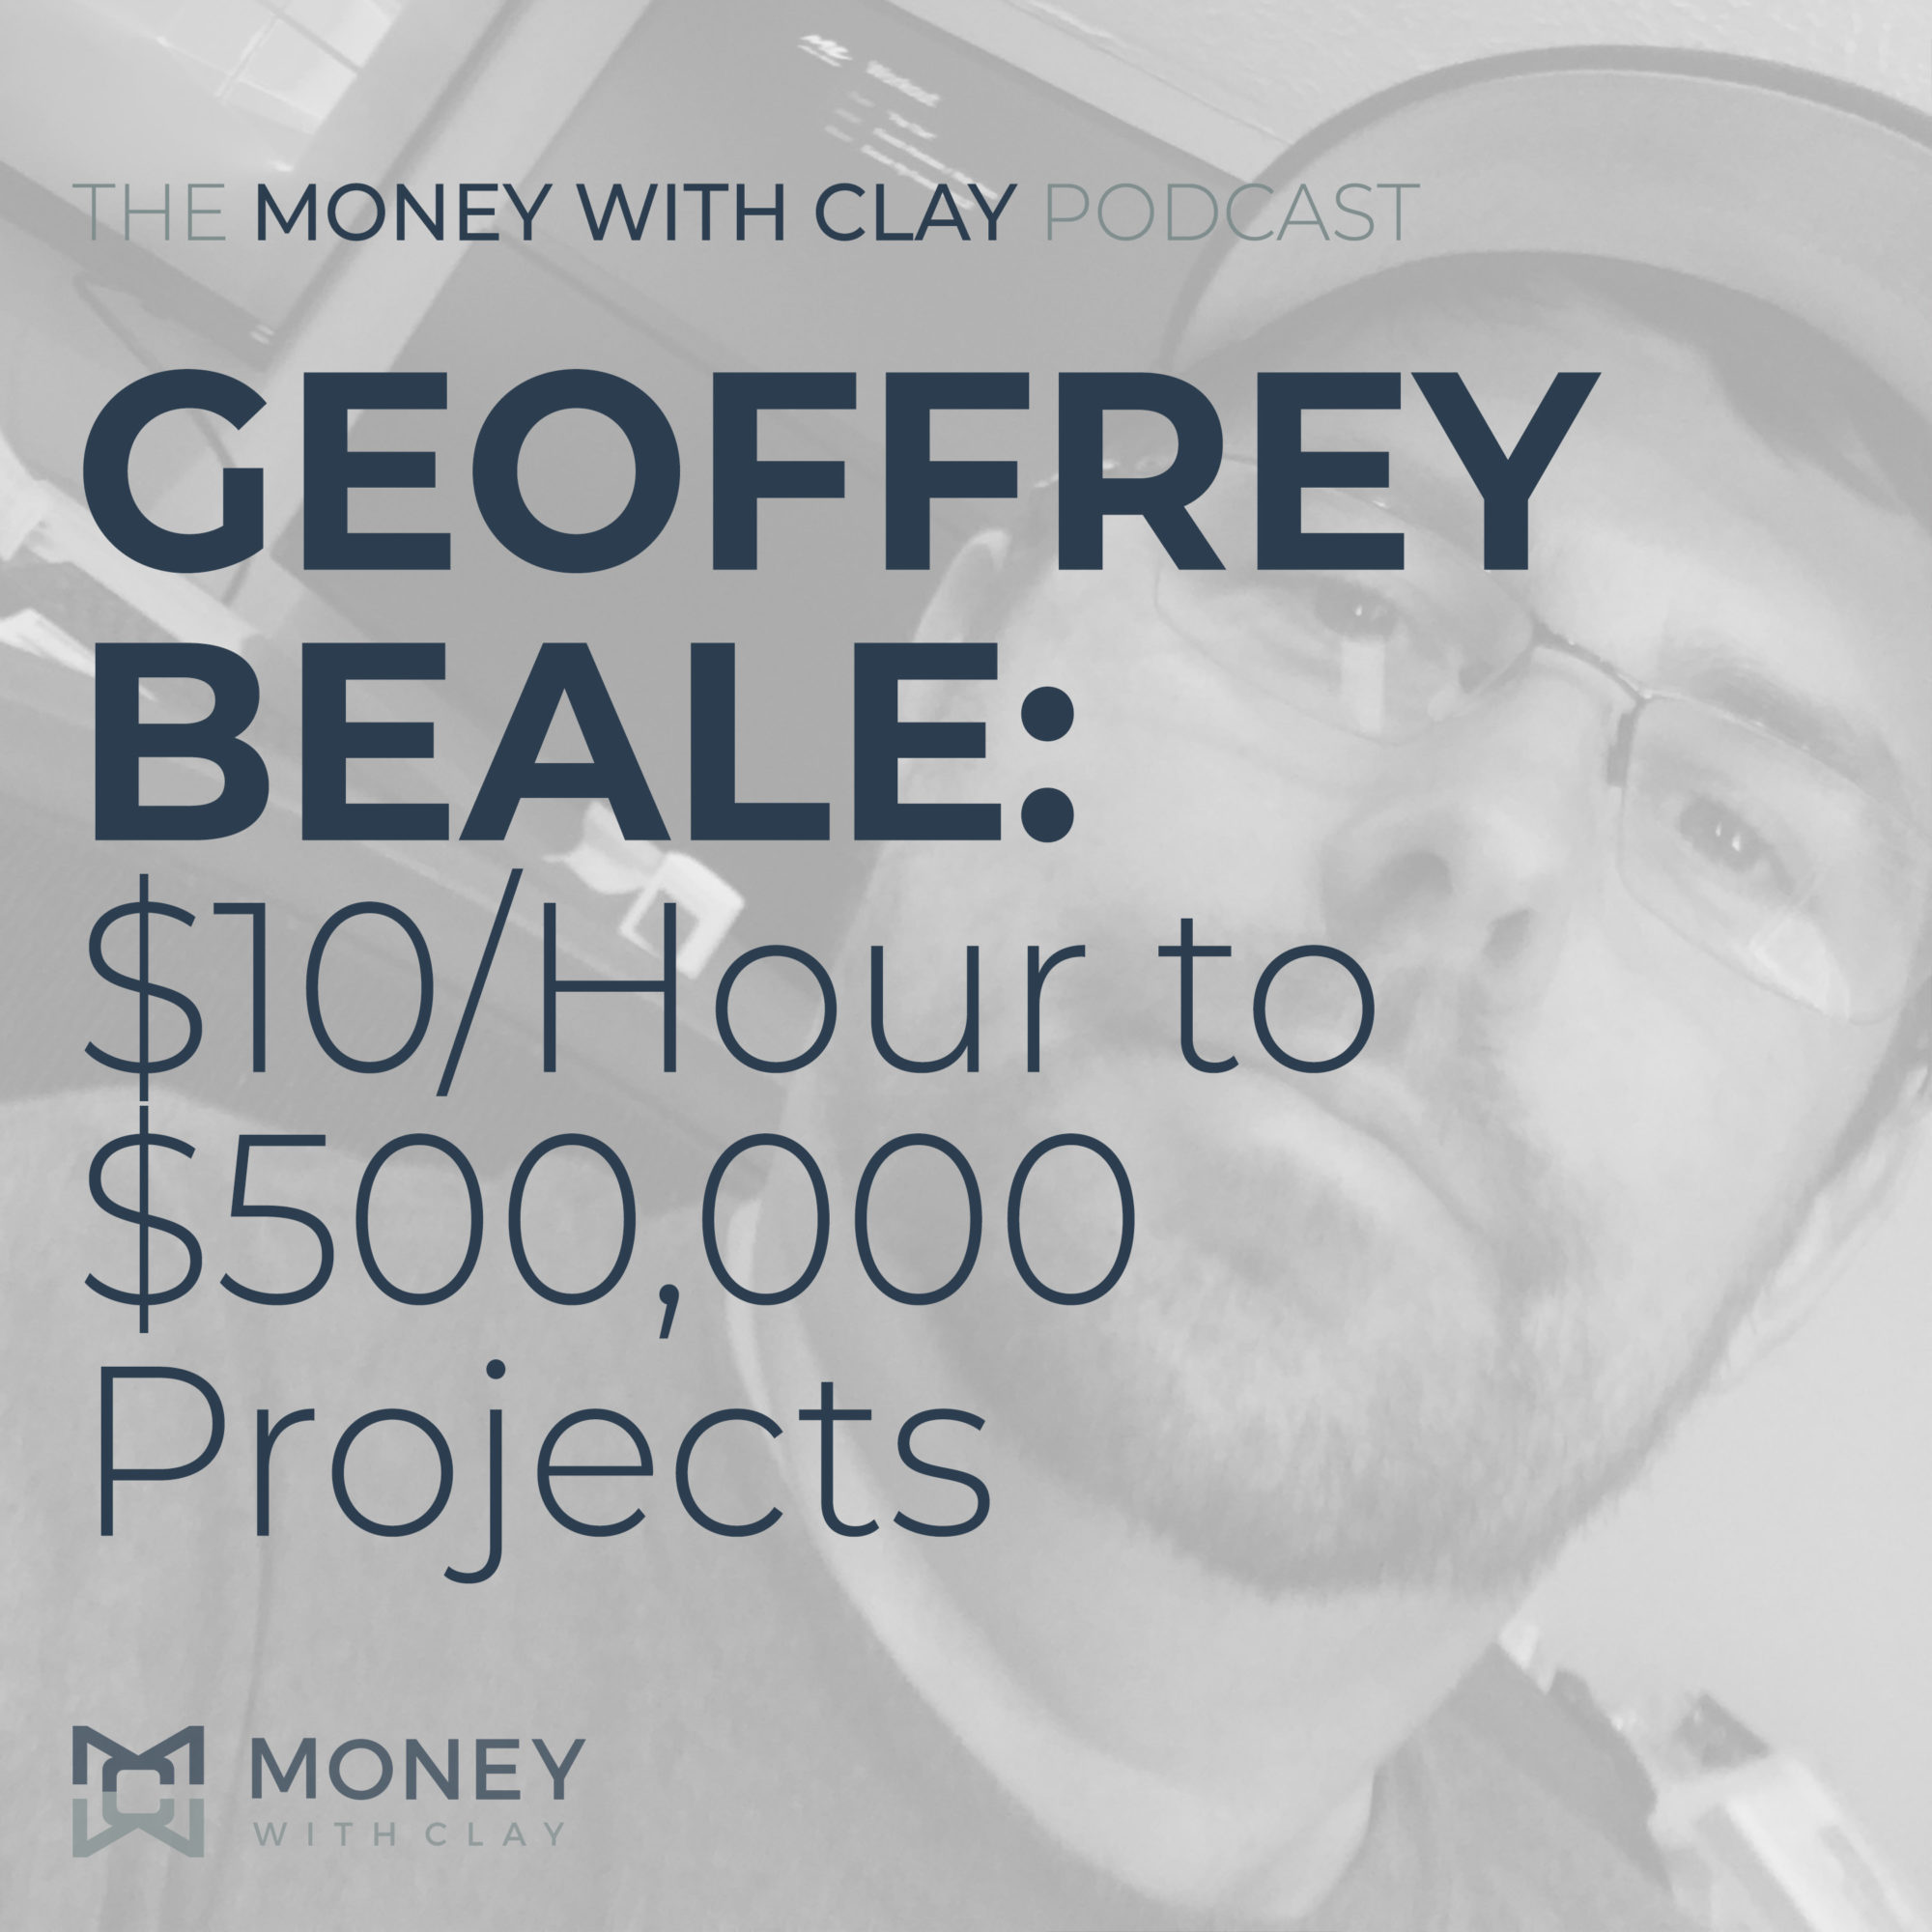 Geoffrey Beale: $10/Hour to $500,000 Projects